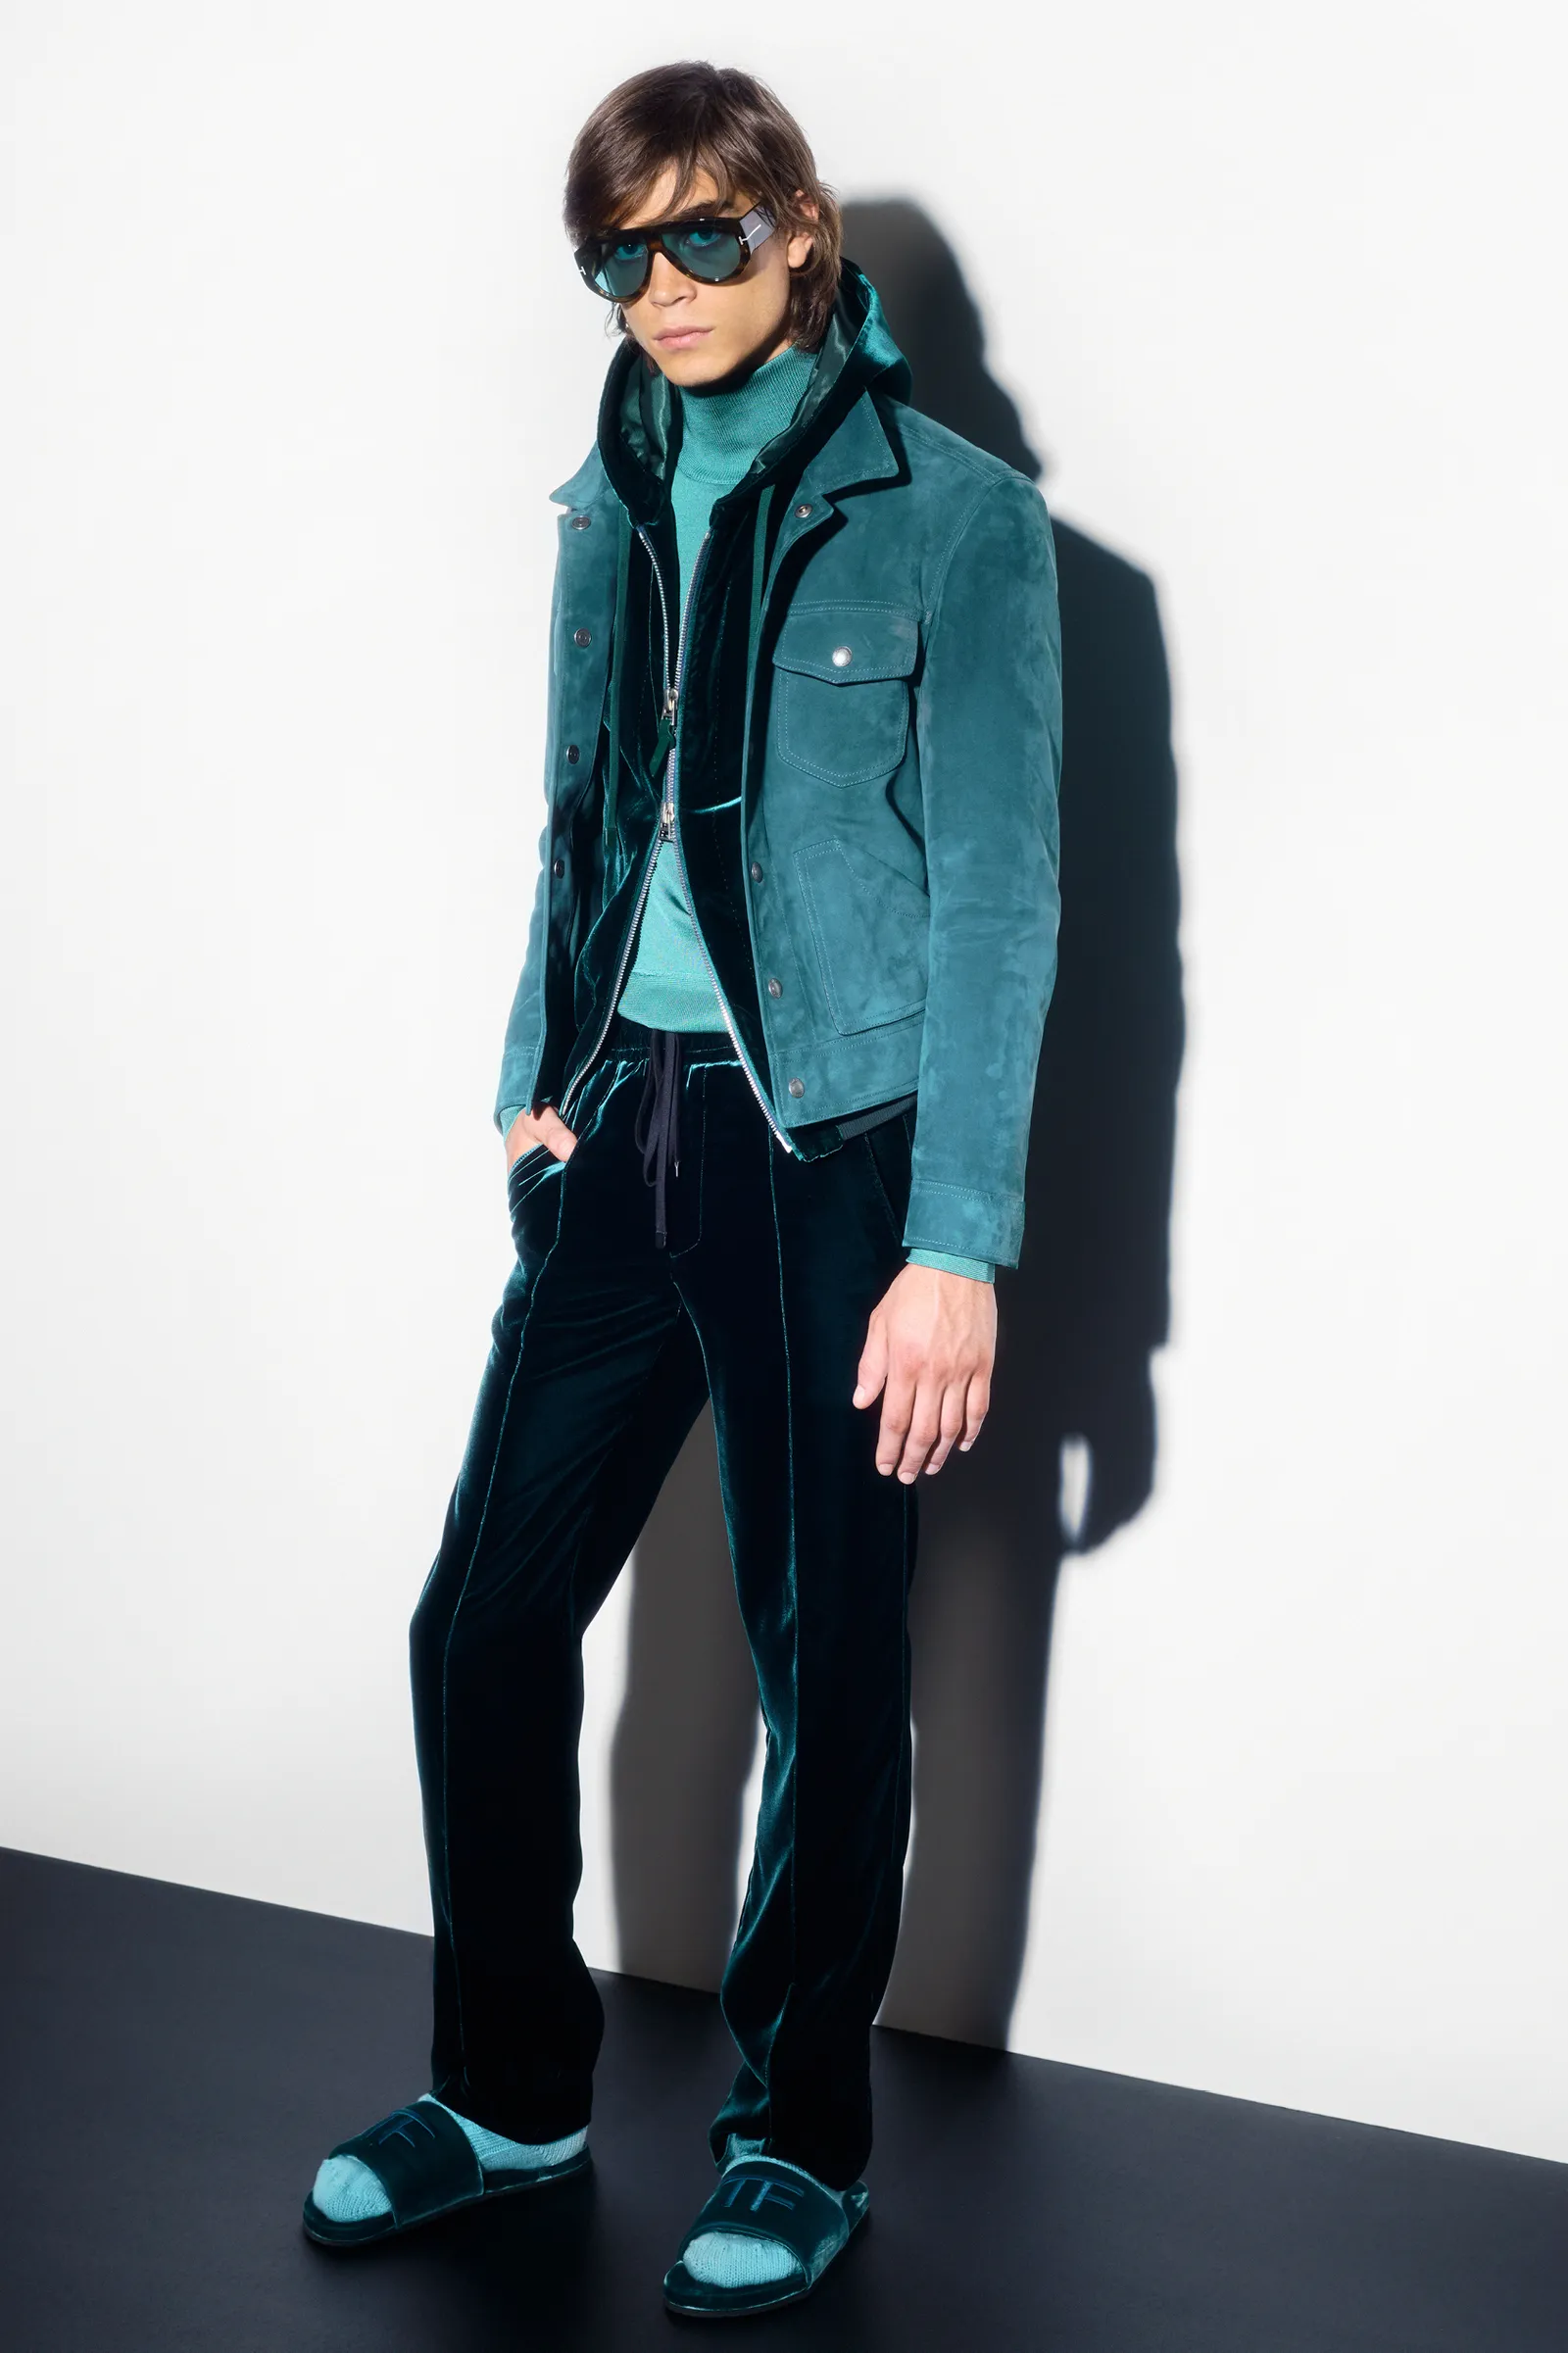 00022-tom-ford-fall-22-mens-nyc-credit-brand.png